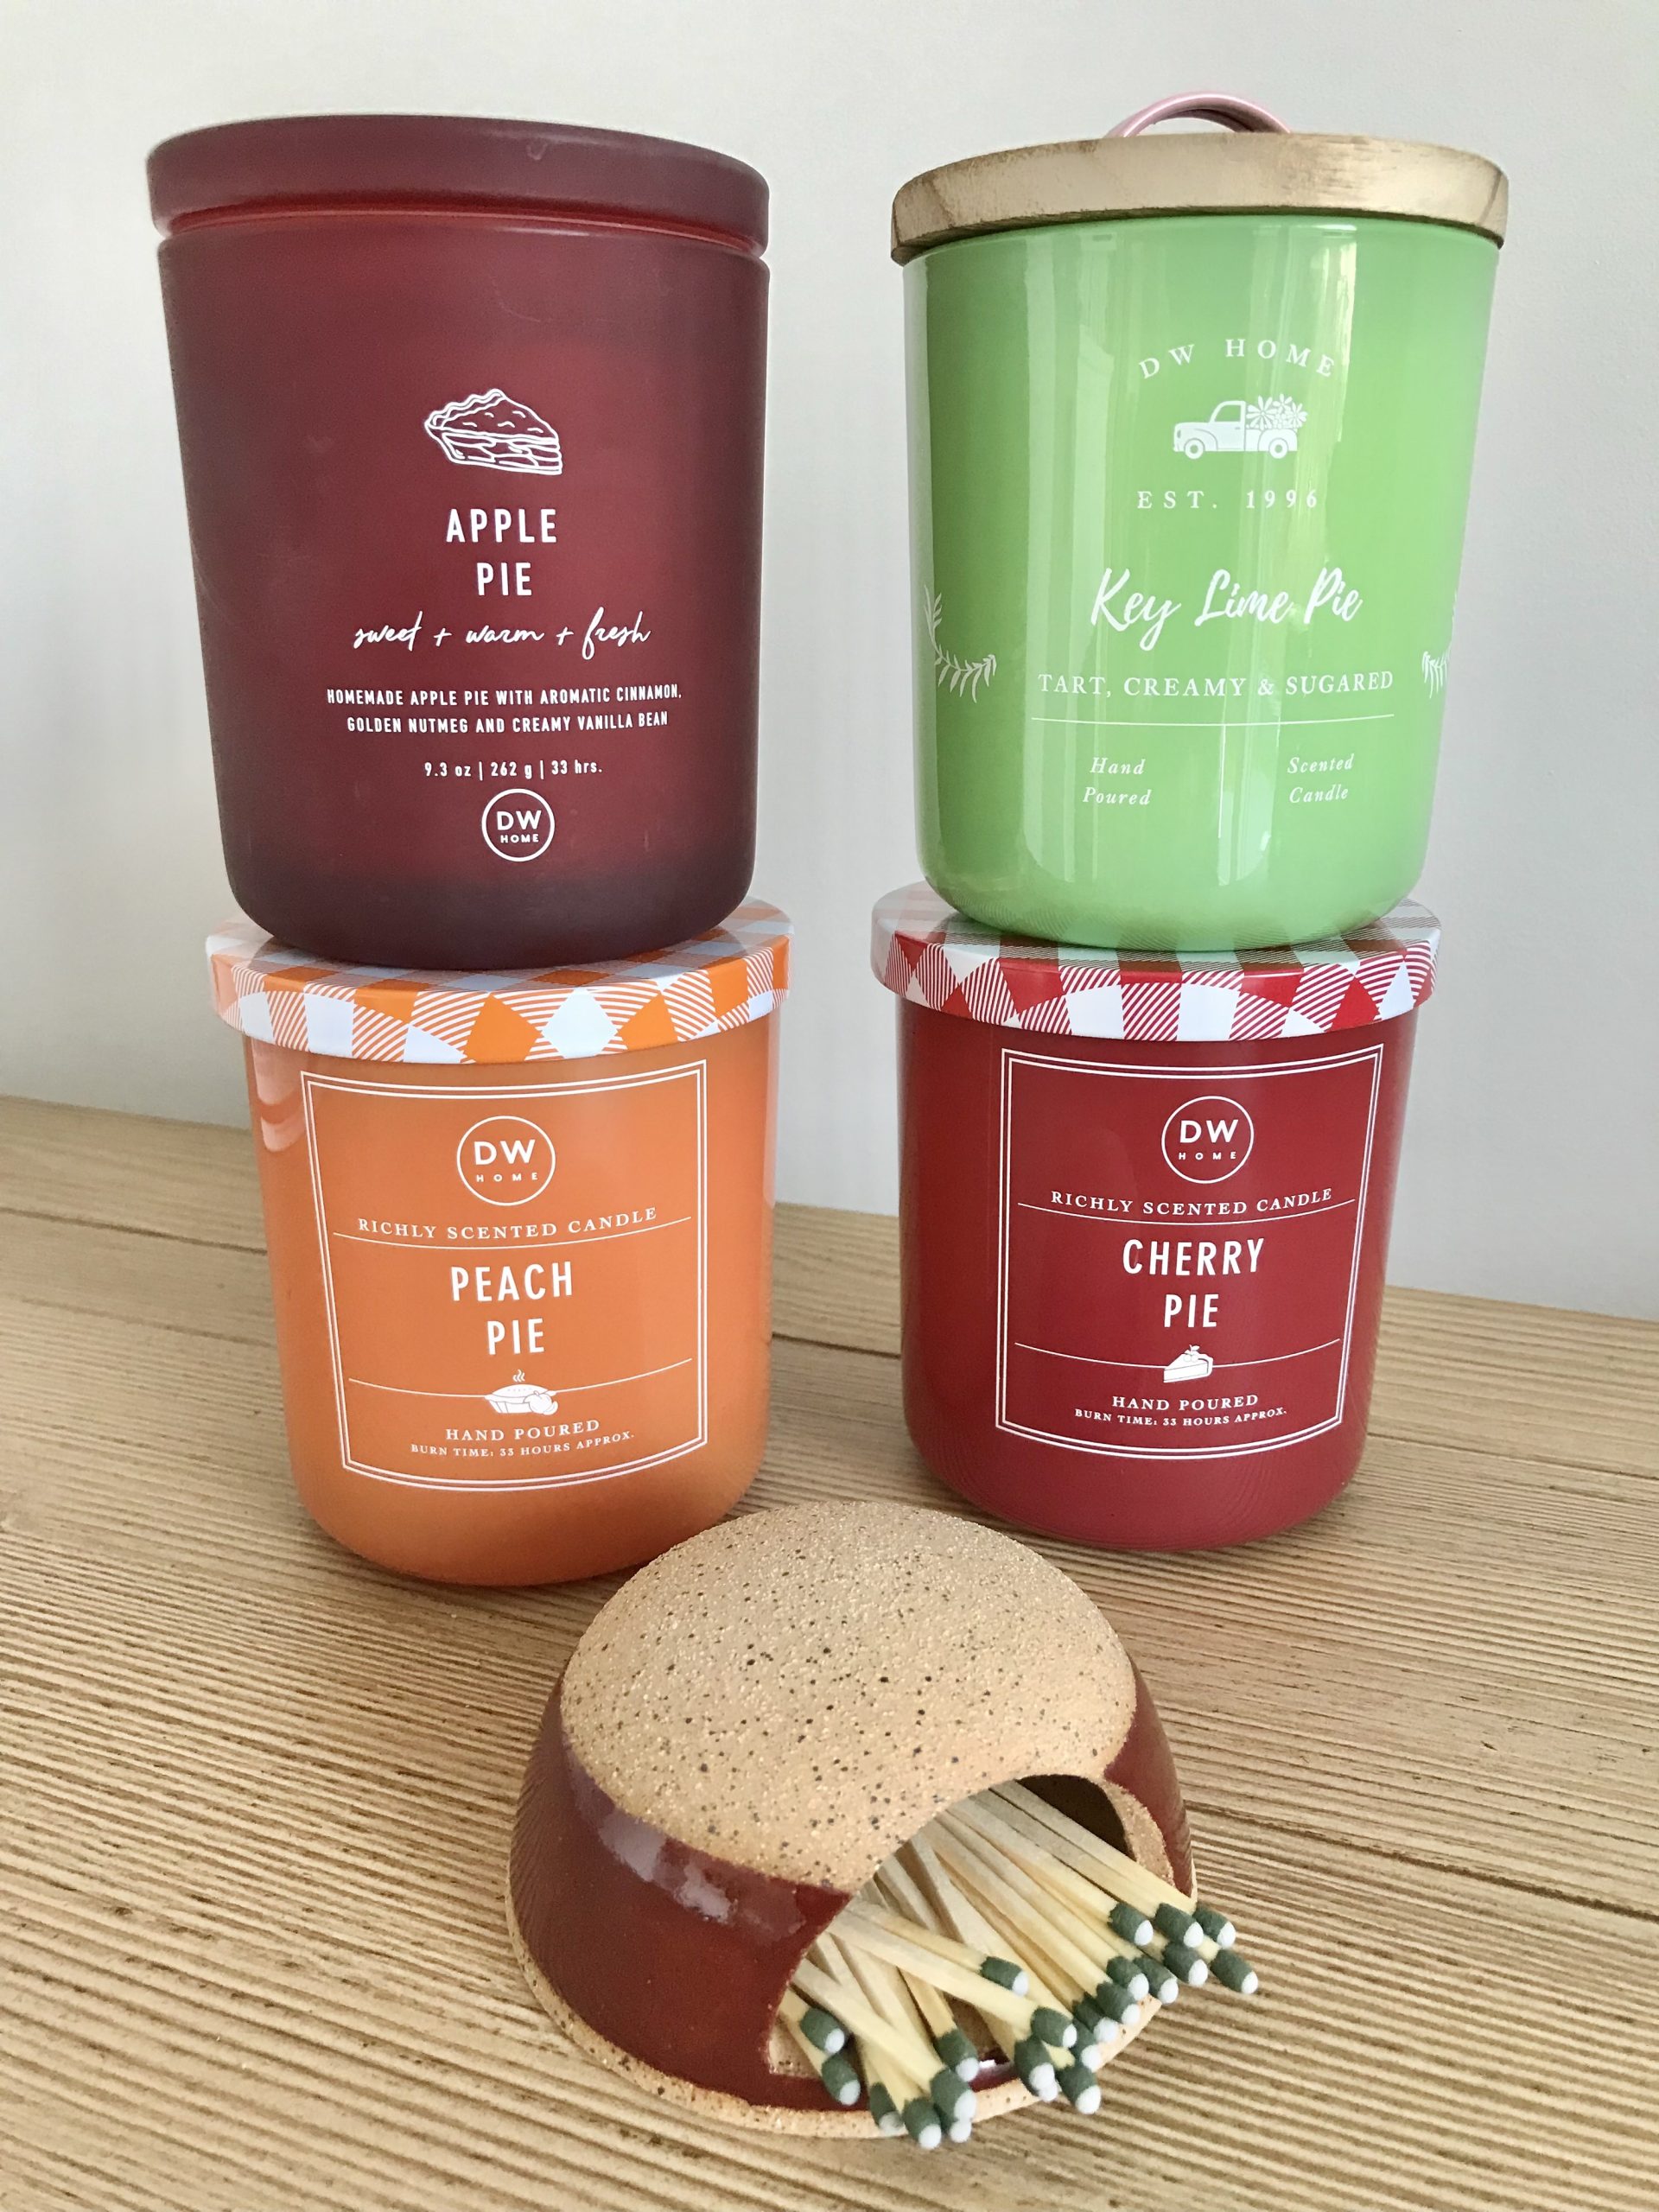 Mavis’ Favorite Things Giveaway – DW Home Candles and a Match Striker From Shamblin Shop